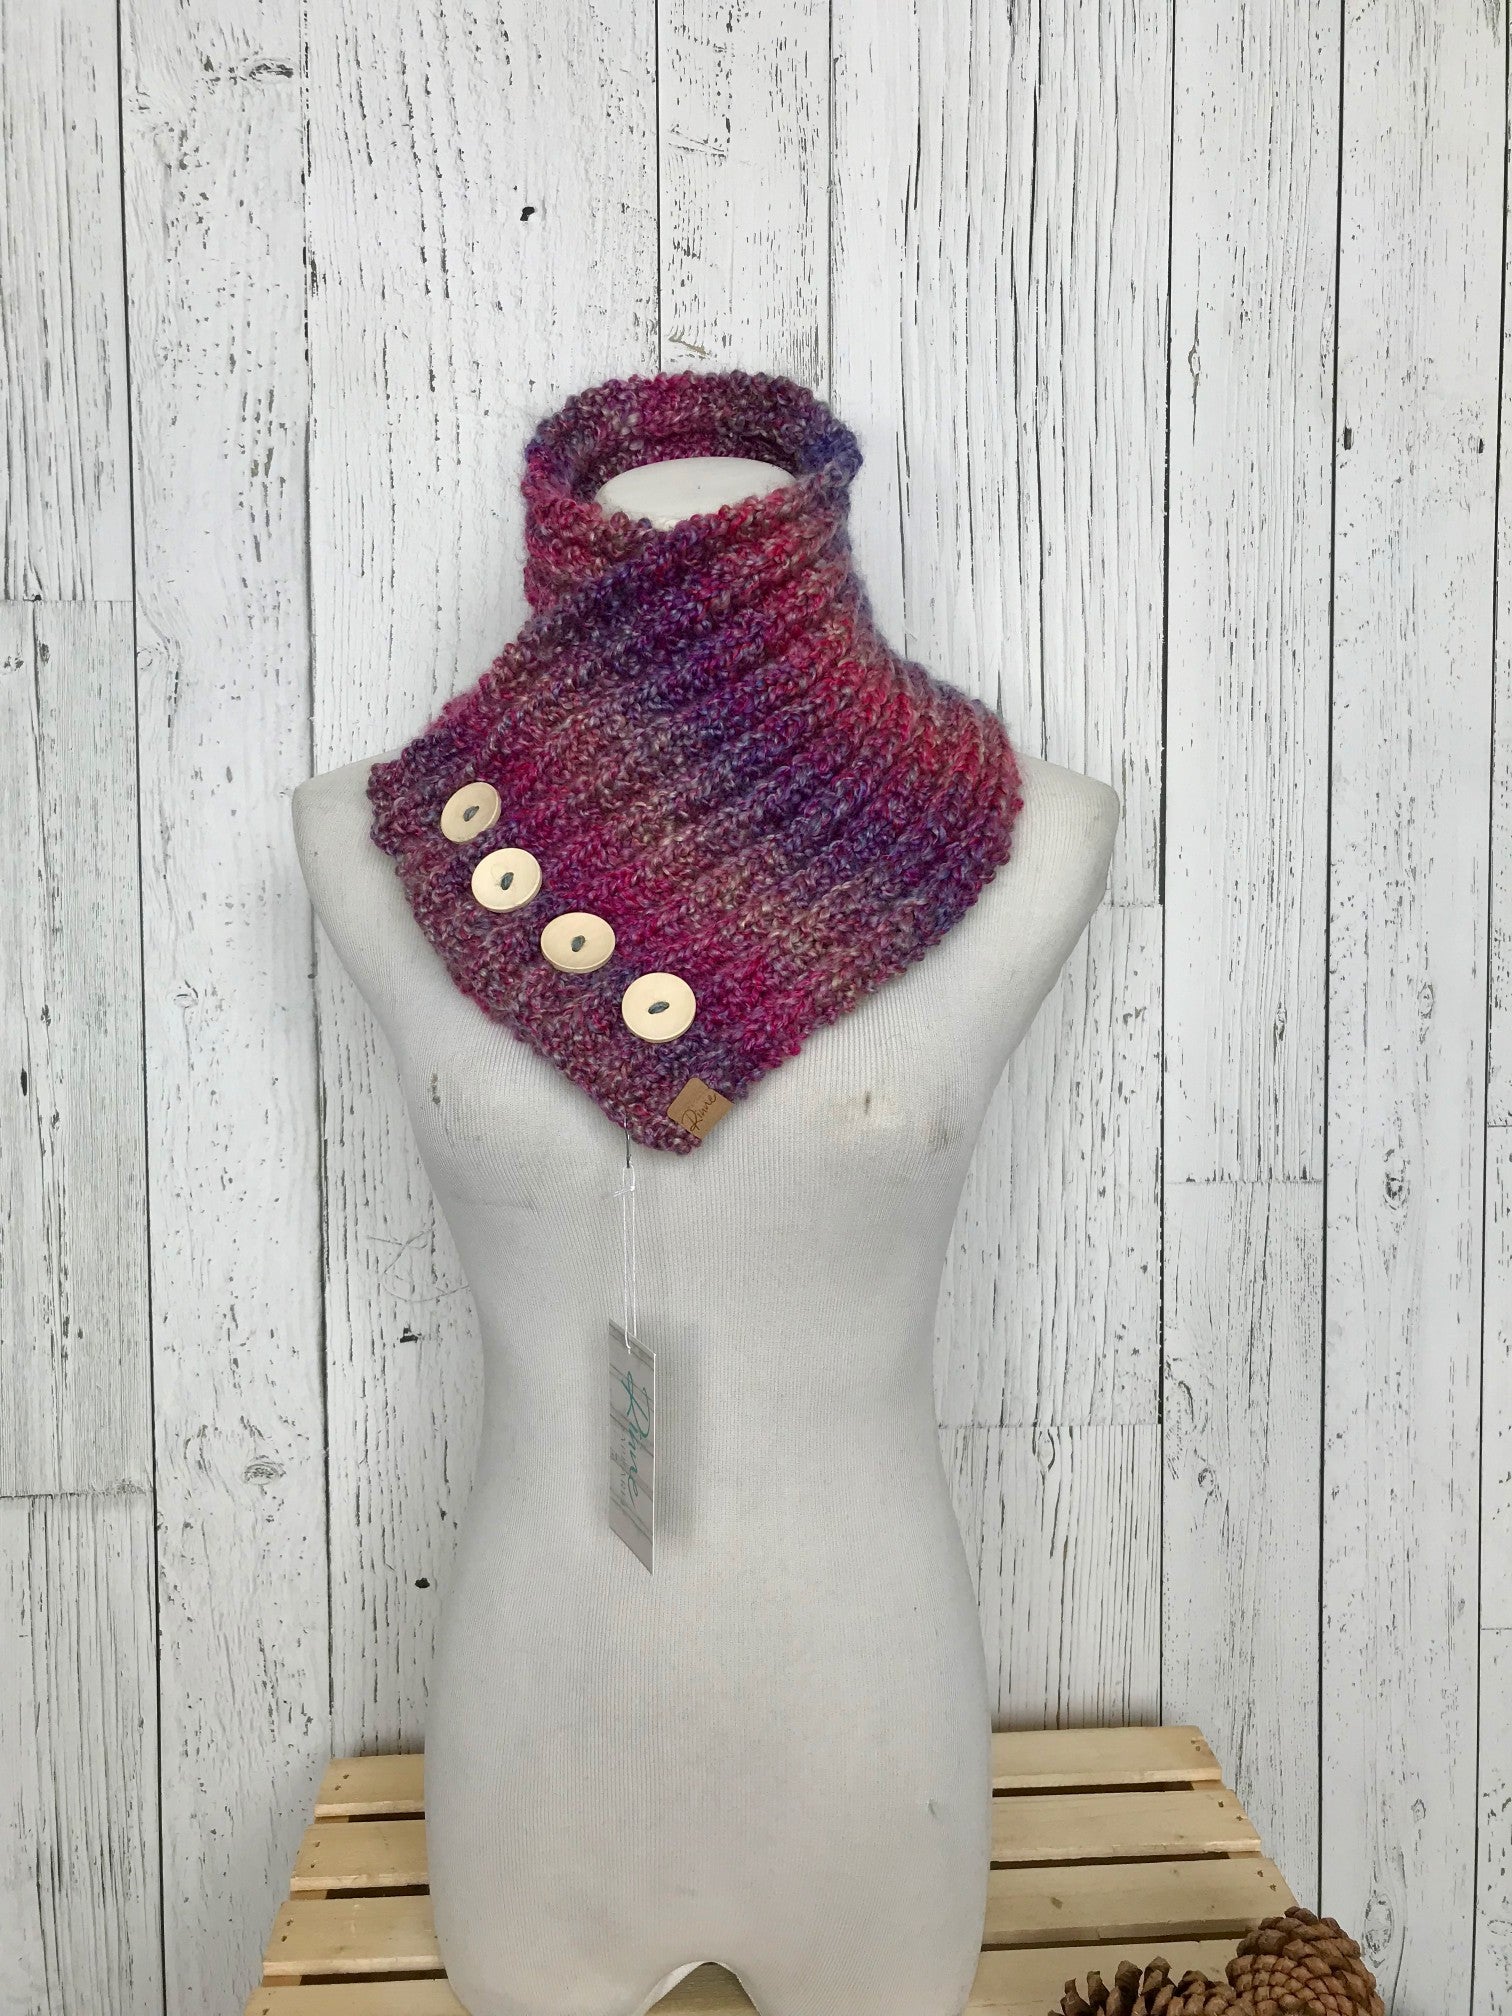 Classic Knit Button Cowl in pink and purple variegated colors with natural wood buttons